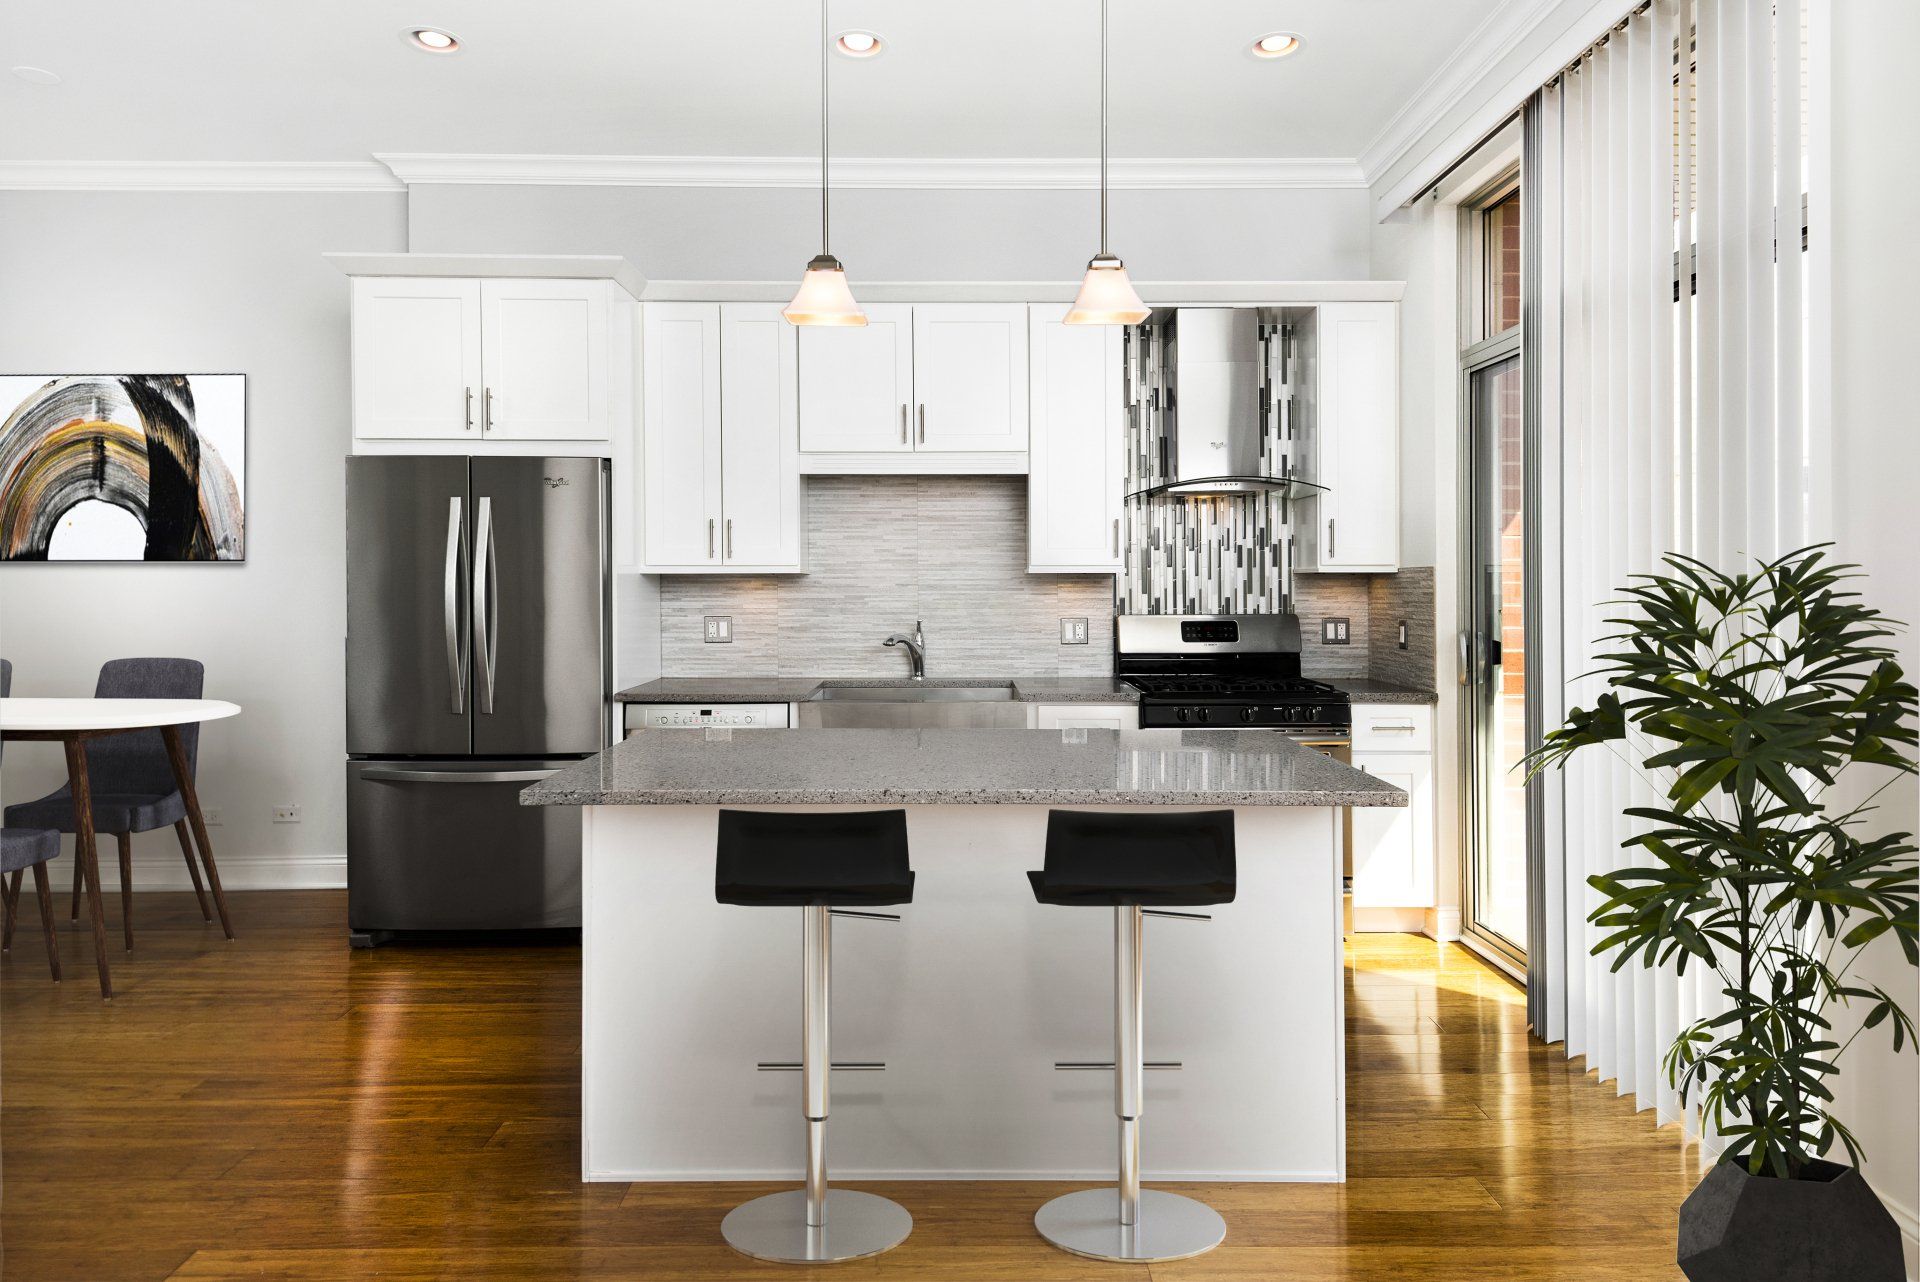 A kitchen with white cabinets, stainless steel appliances, and a large island at Reside on Jackson.